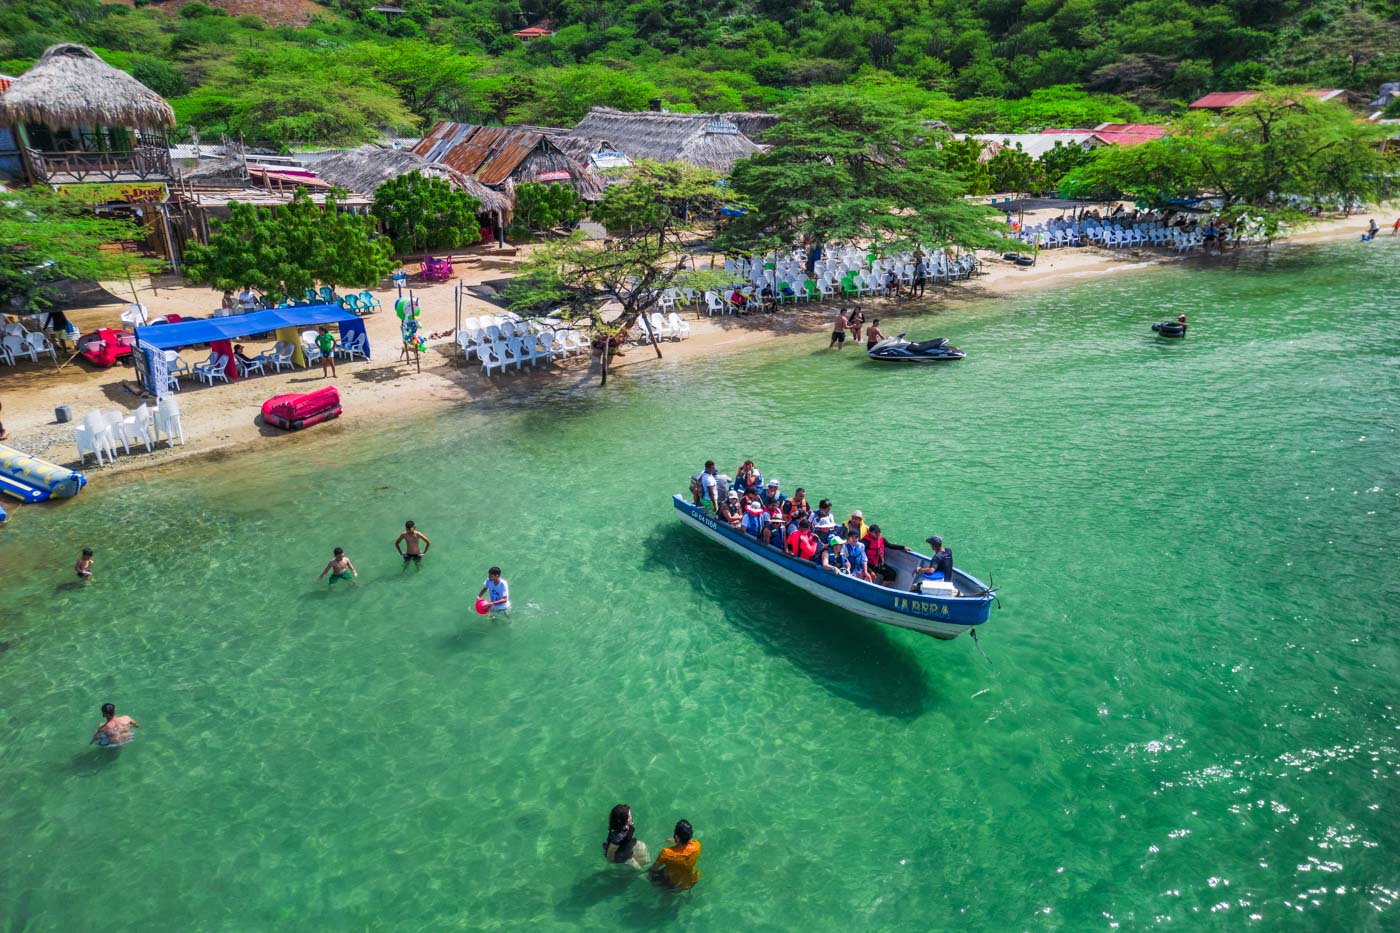 A taxi boat leaving Playa Grande while people are swimming and there are seats lined up along the beach.